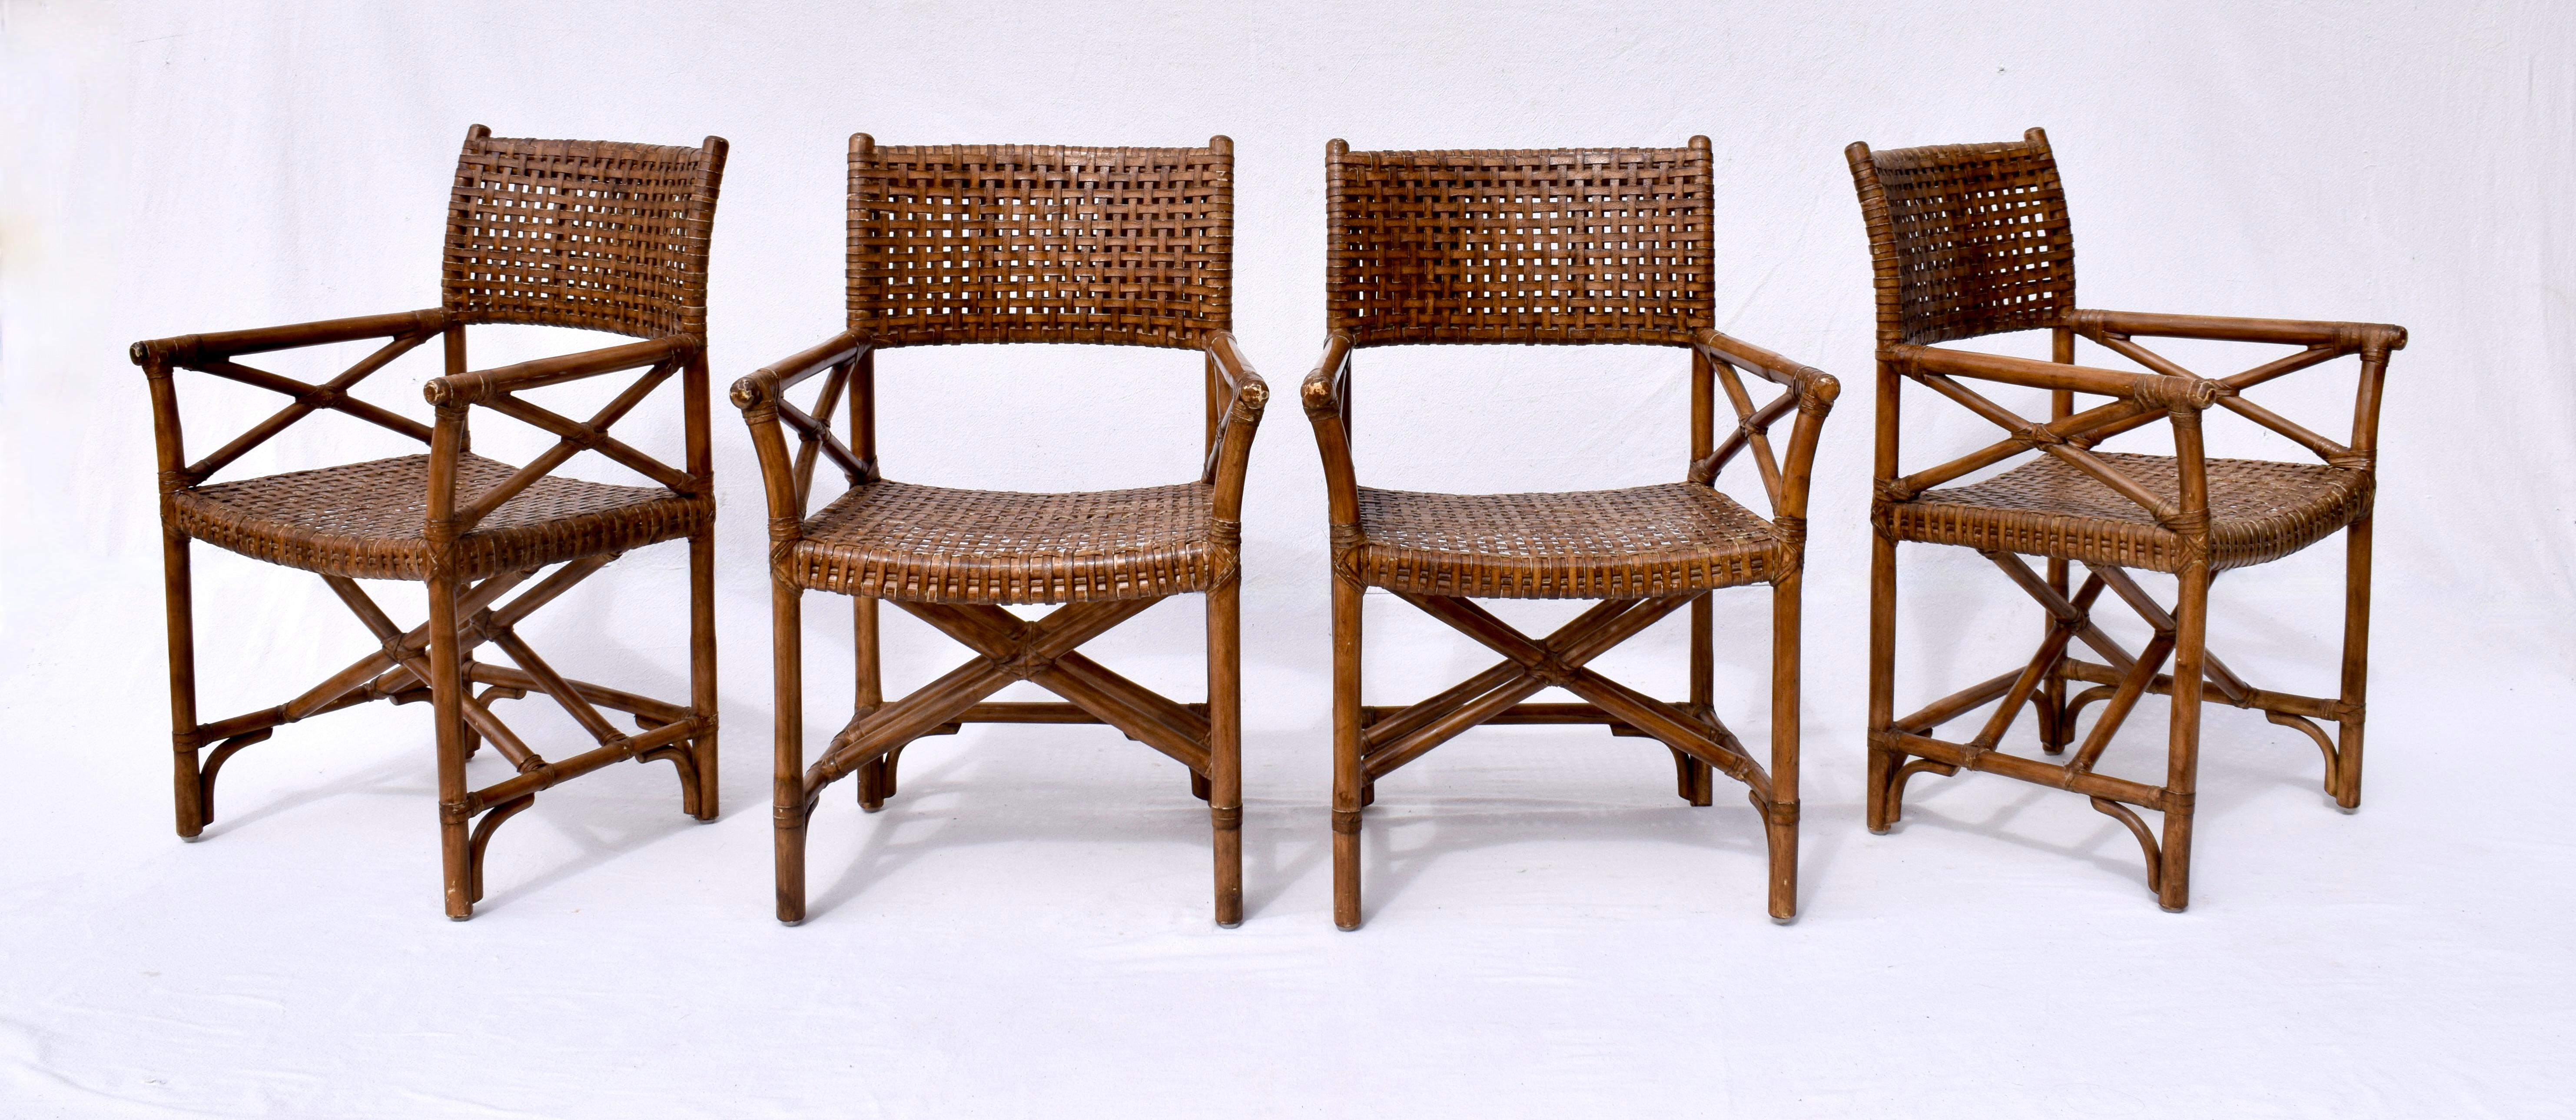 Set of four laced leather rattan dining chairs or armchairs made in the manner and style of McGuire. Director's style armchairs featuring woven rawhide seats and backs reinforced with leather strapping. Each has a beautifully distressed patina from